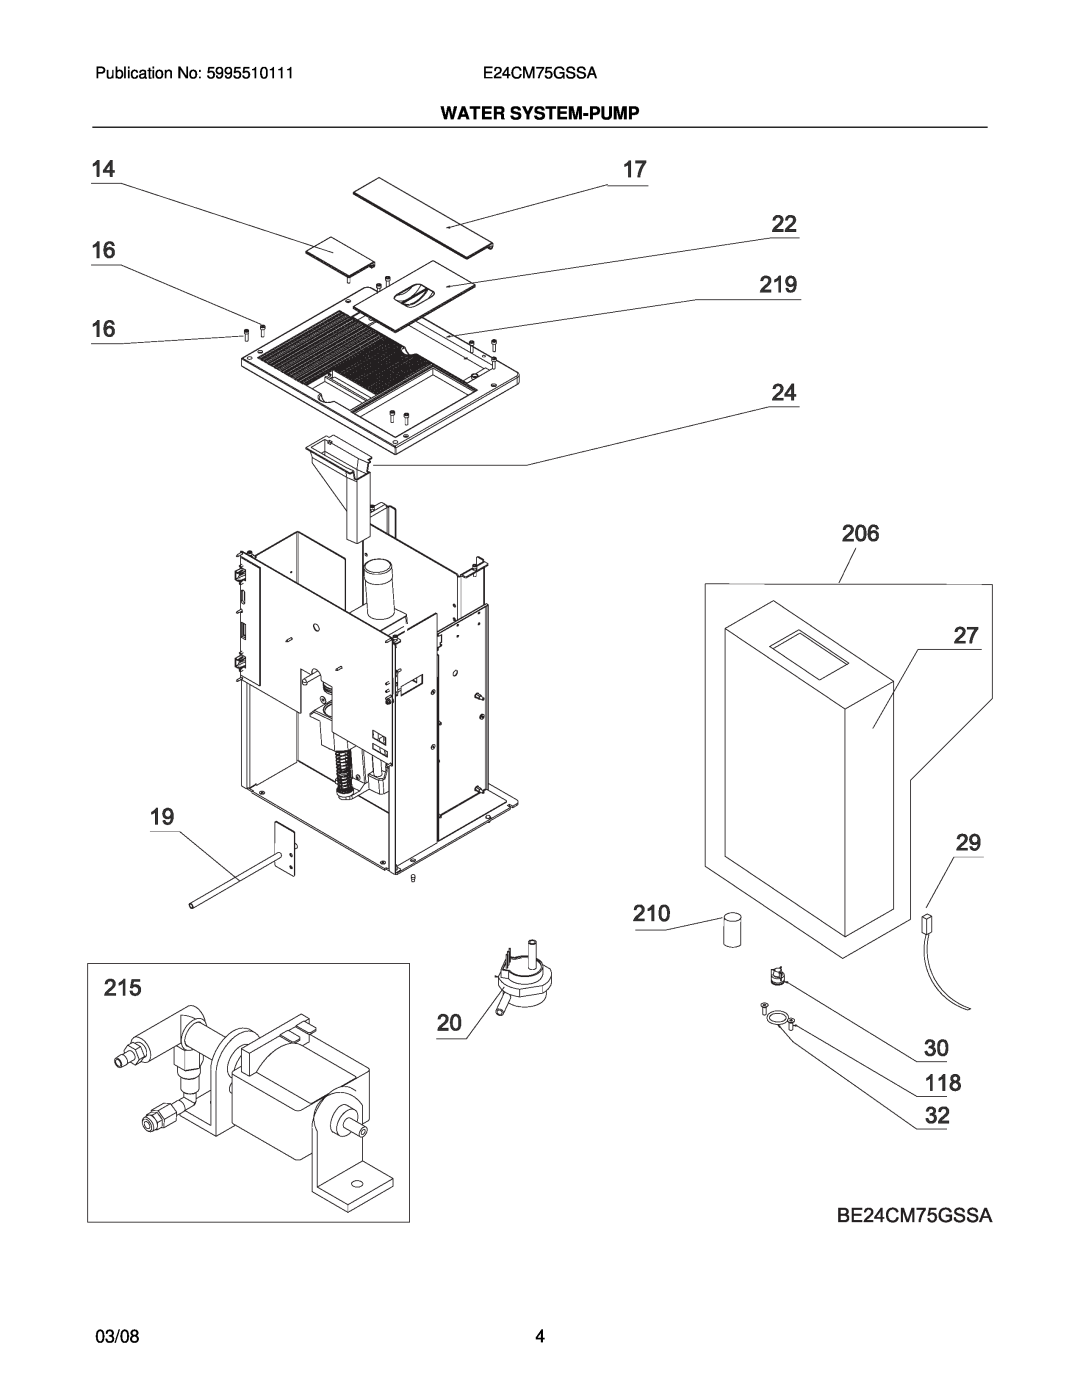 Electrolux E24CM75GSSA installation instructions Water System-Pump, 03/08 